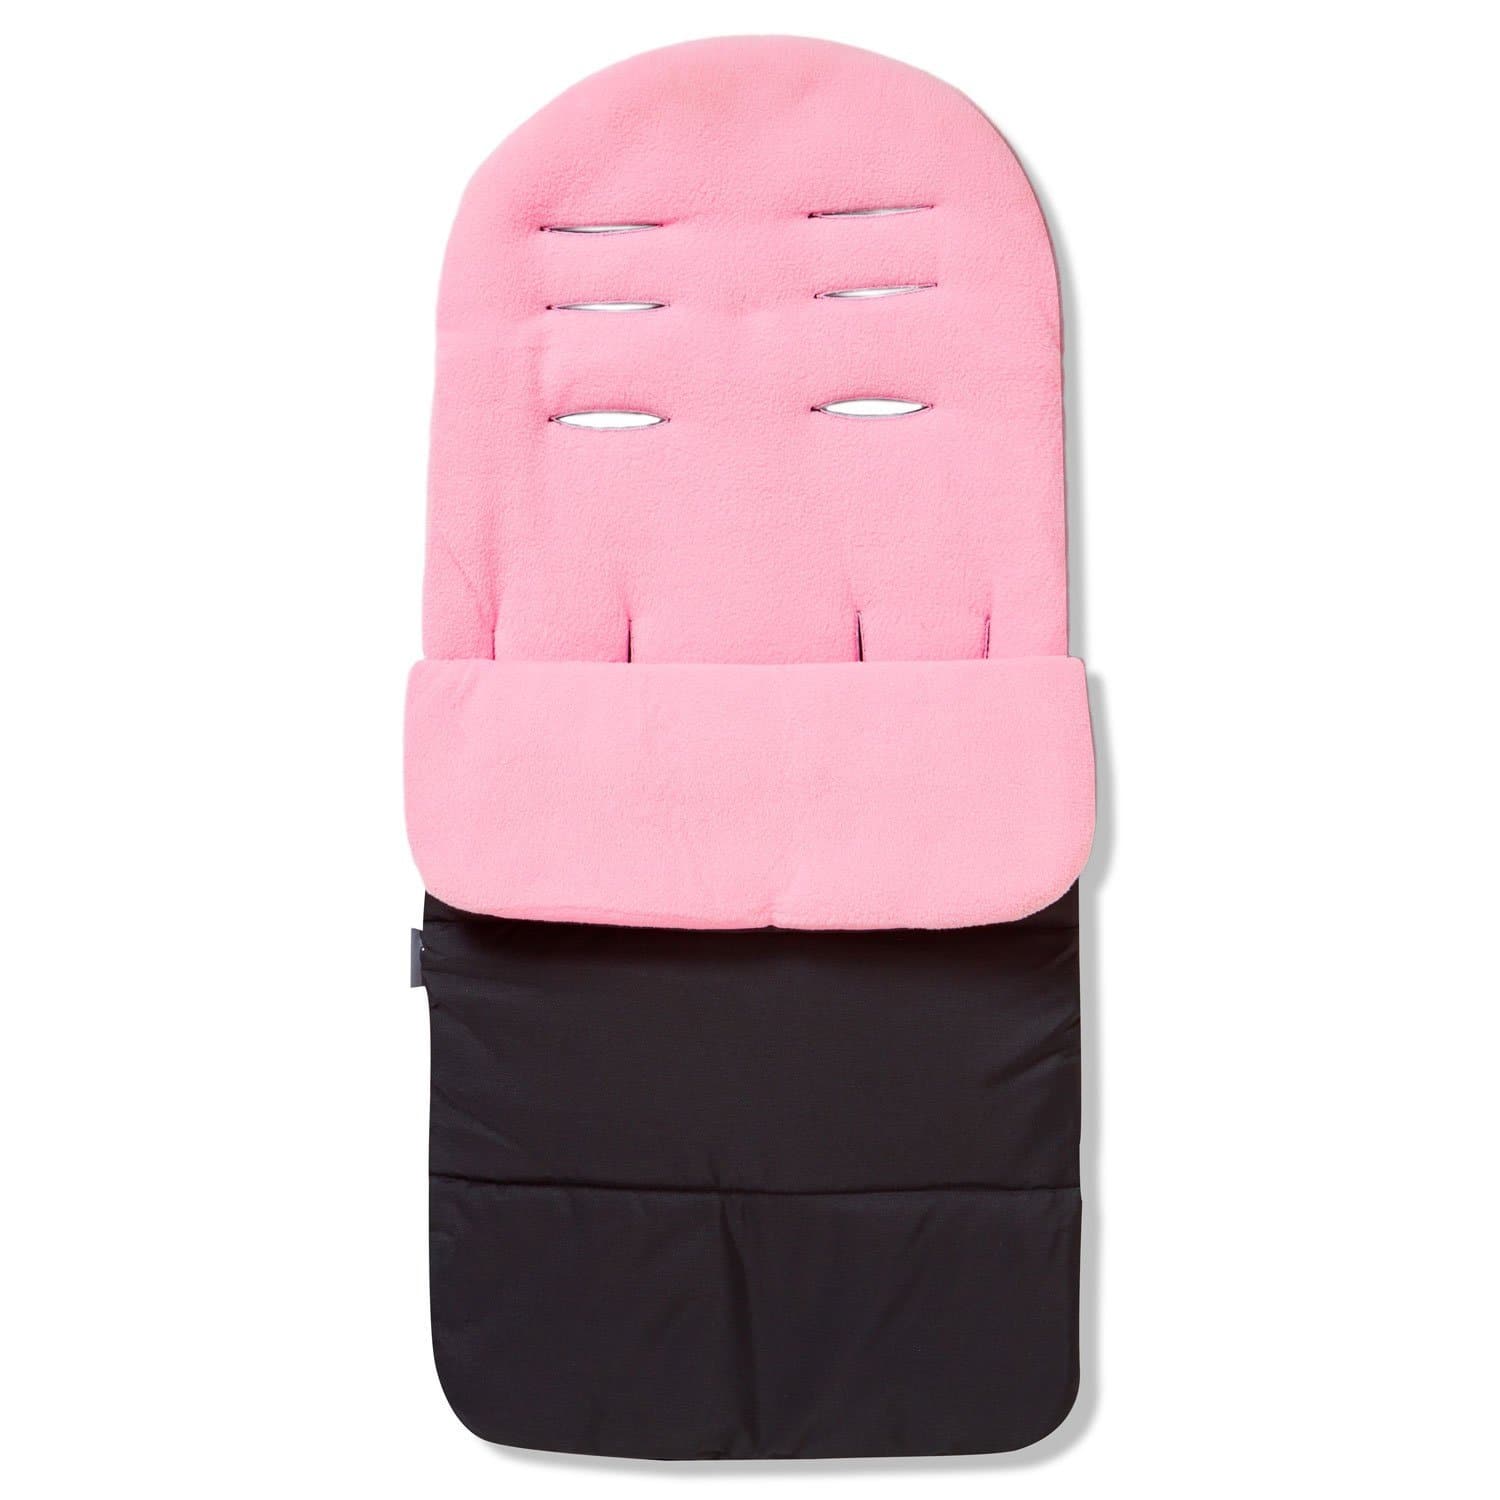 Premium Footmuff / Cosy Toes Compatible with Maclaren - Candy Pink / Fits All Models | For Your Little One